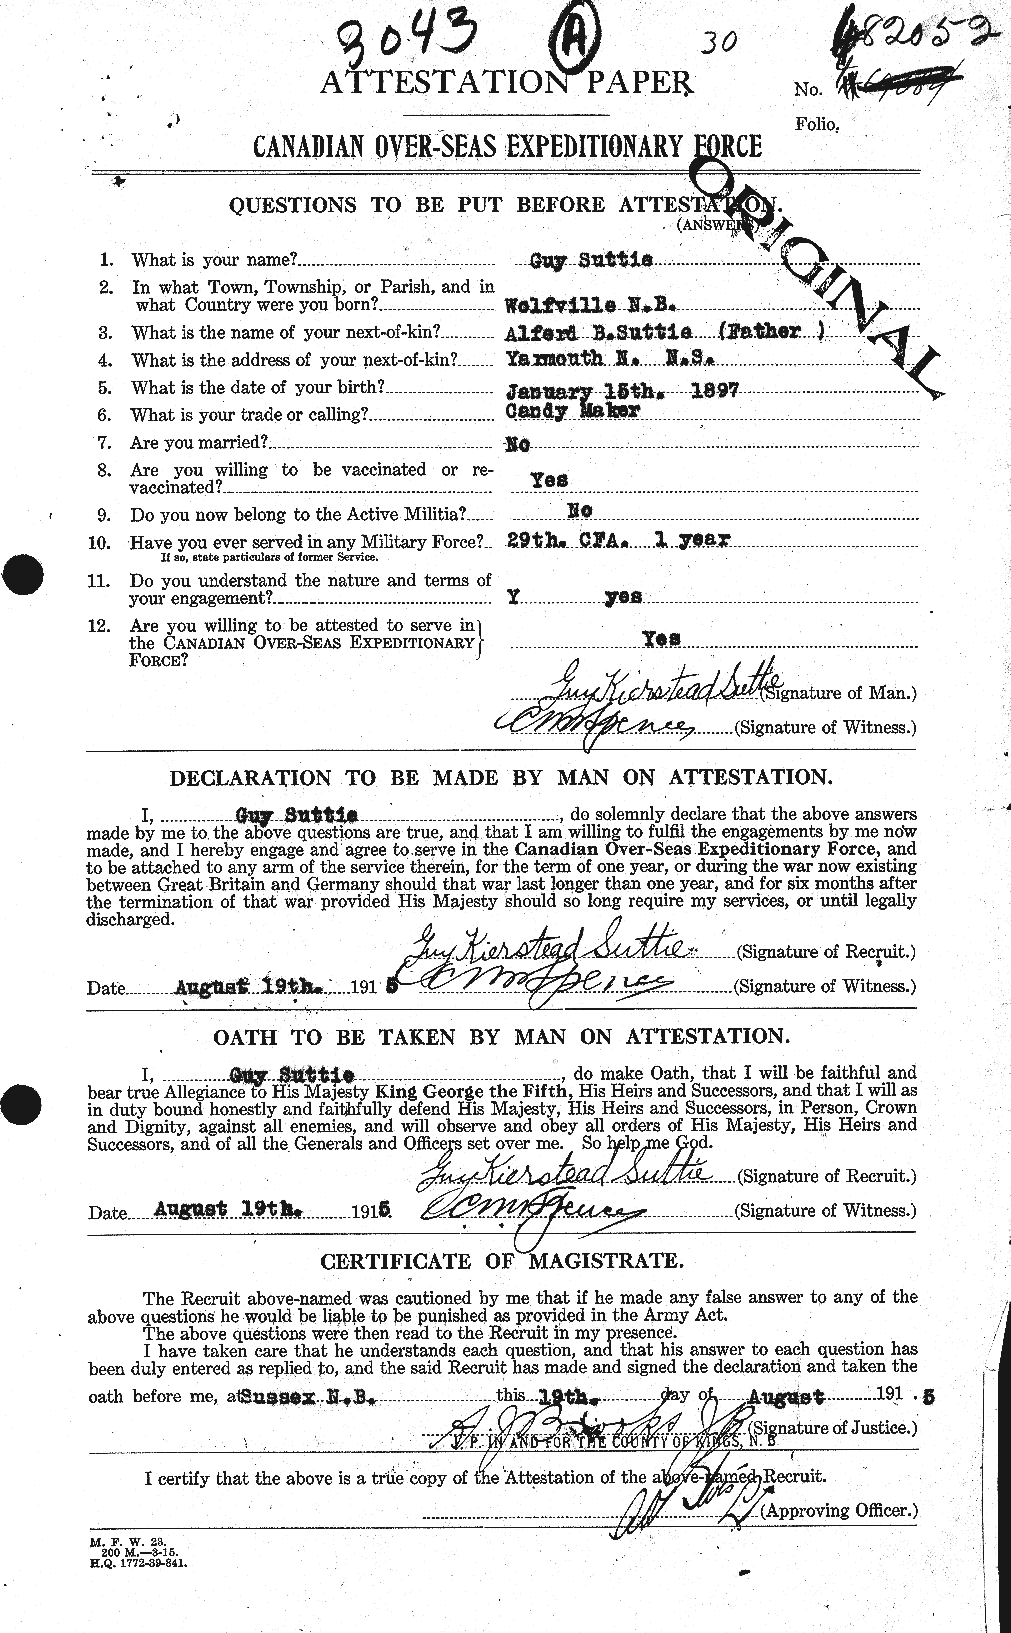 Personnel Records of the First World War - CEF 126309a